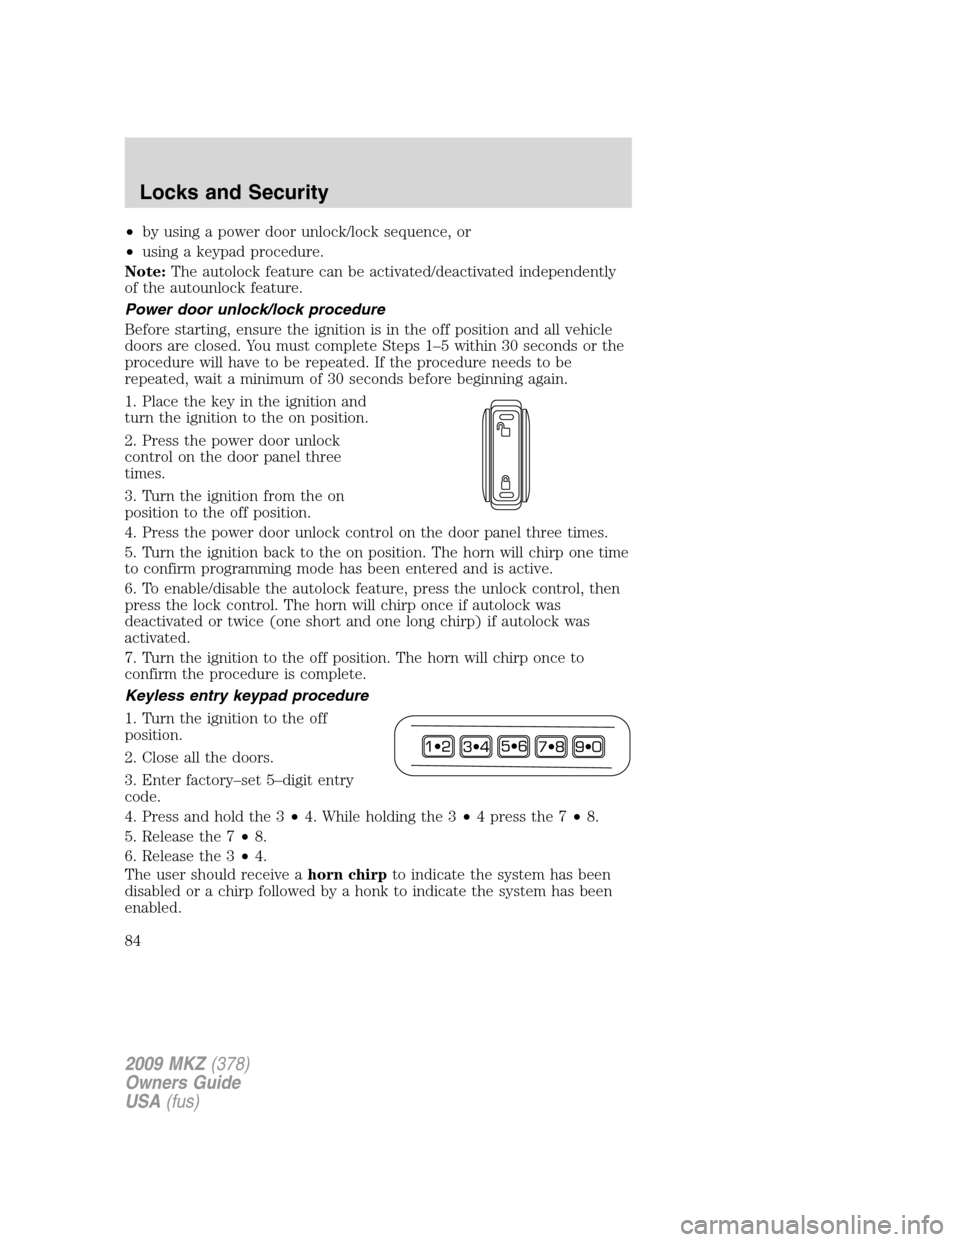 LINCOLN MKZ 2009 Owners Guide •by using a power door unlock/lock sequence, or
•using a keypad procedure.
Note:The autolock feature can be activated/deactivated independently
of the autounlock feature.
Power door unlock/lock pr